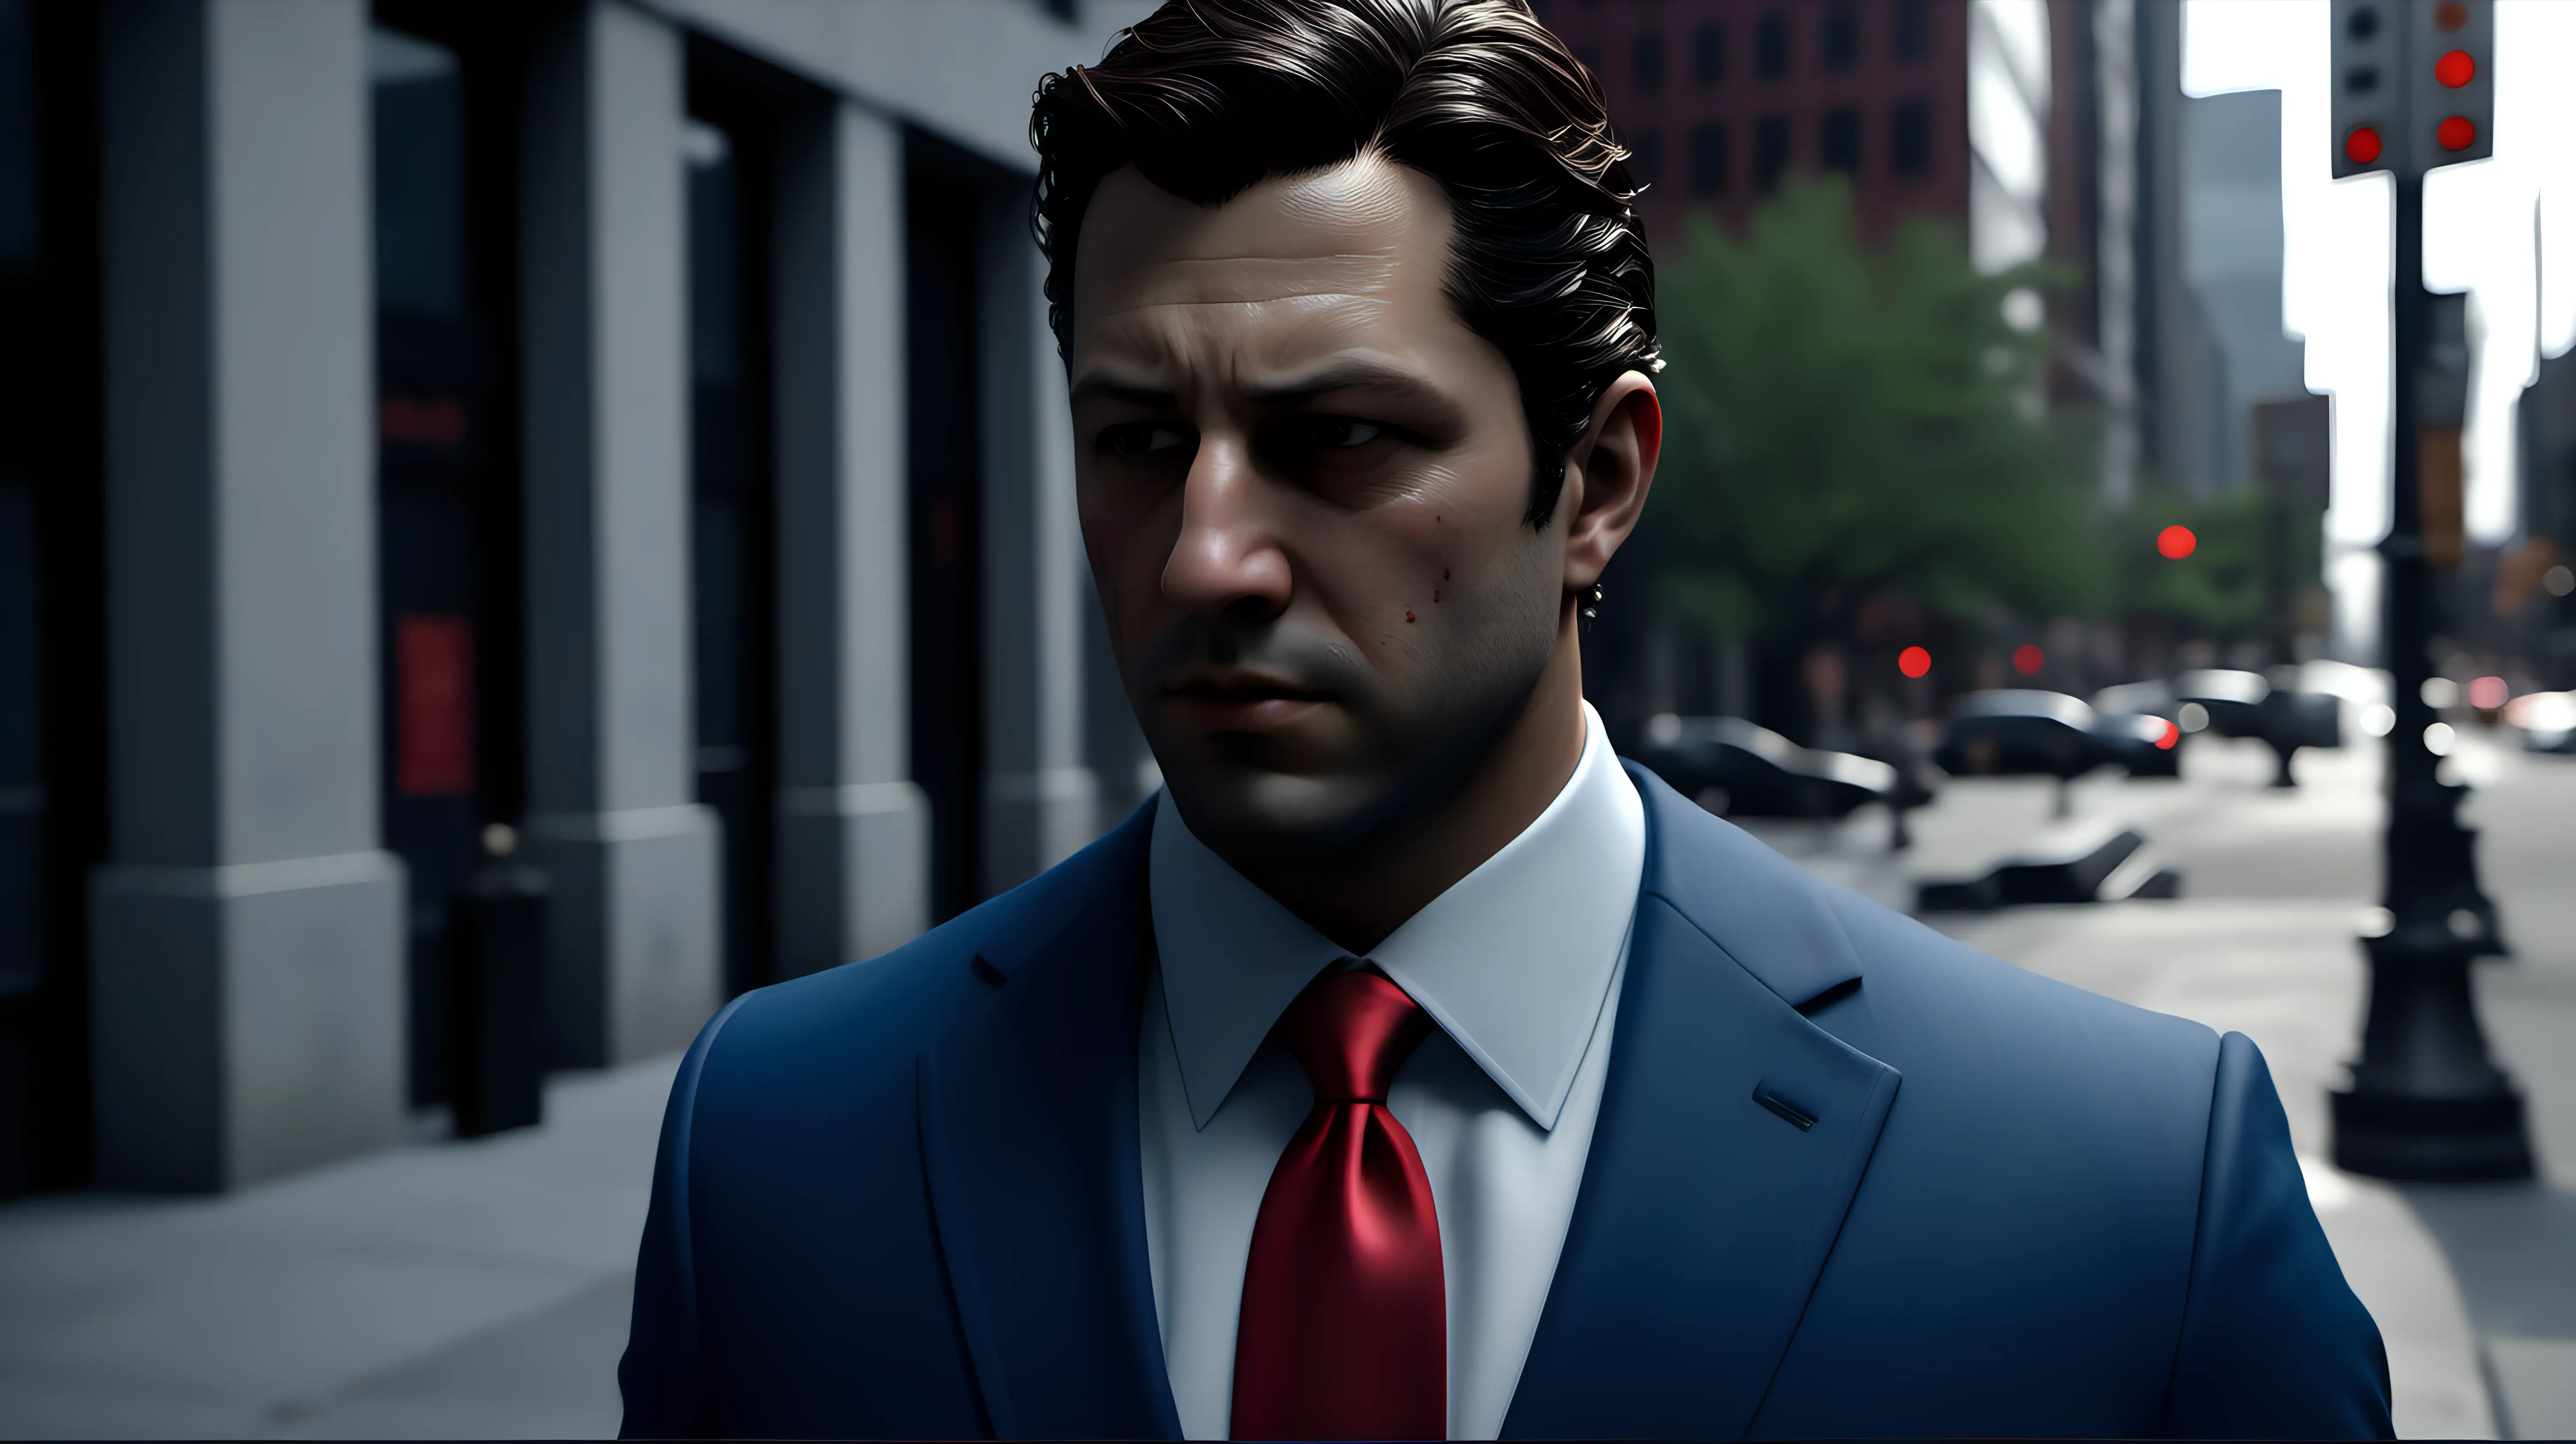 Ambitious Businessman Jason in a Striking Blue Suit Engaged in Intense Conversation